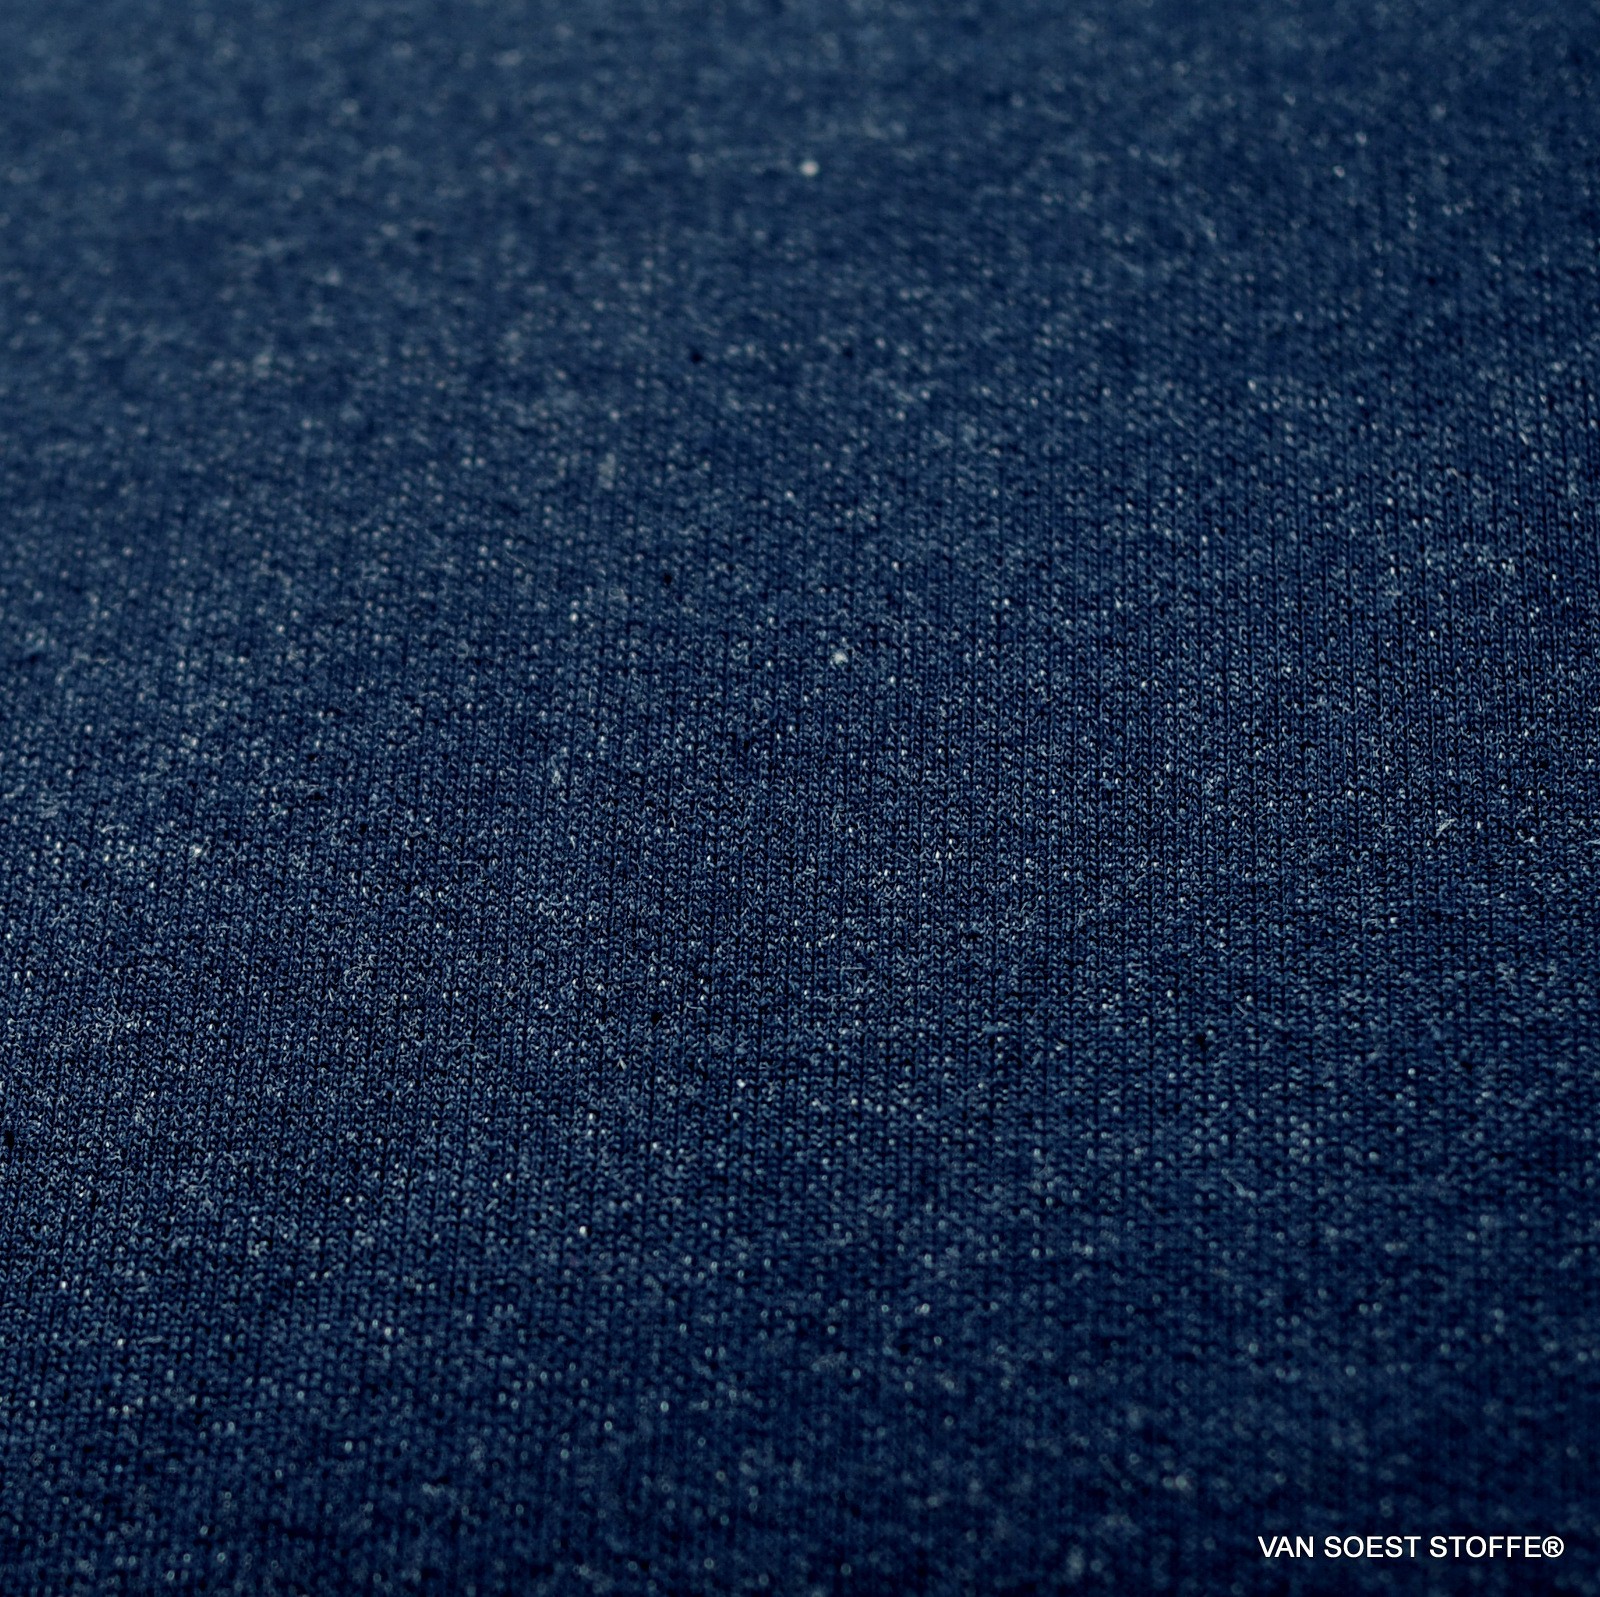 Indigo Blue 8 oz 100% Cotton Denim Chambray Fabric,56 Inches Wide, by The  Yard : Amazon.in: Home & Kitchen